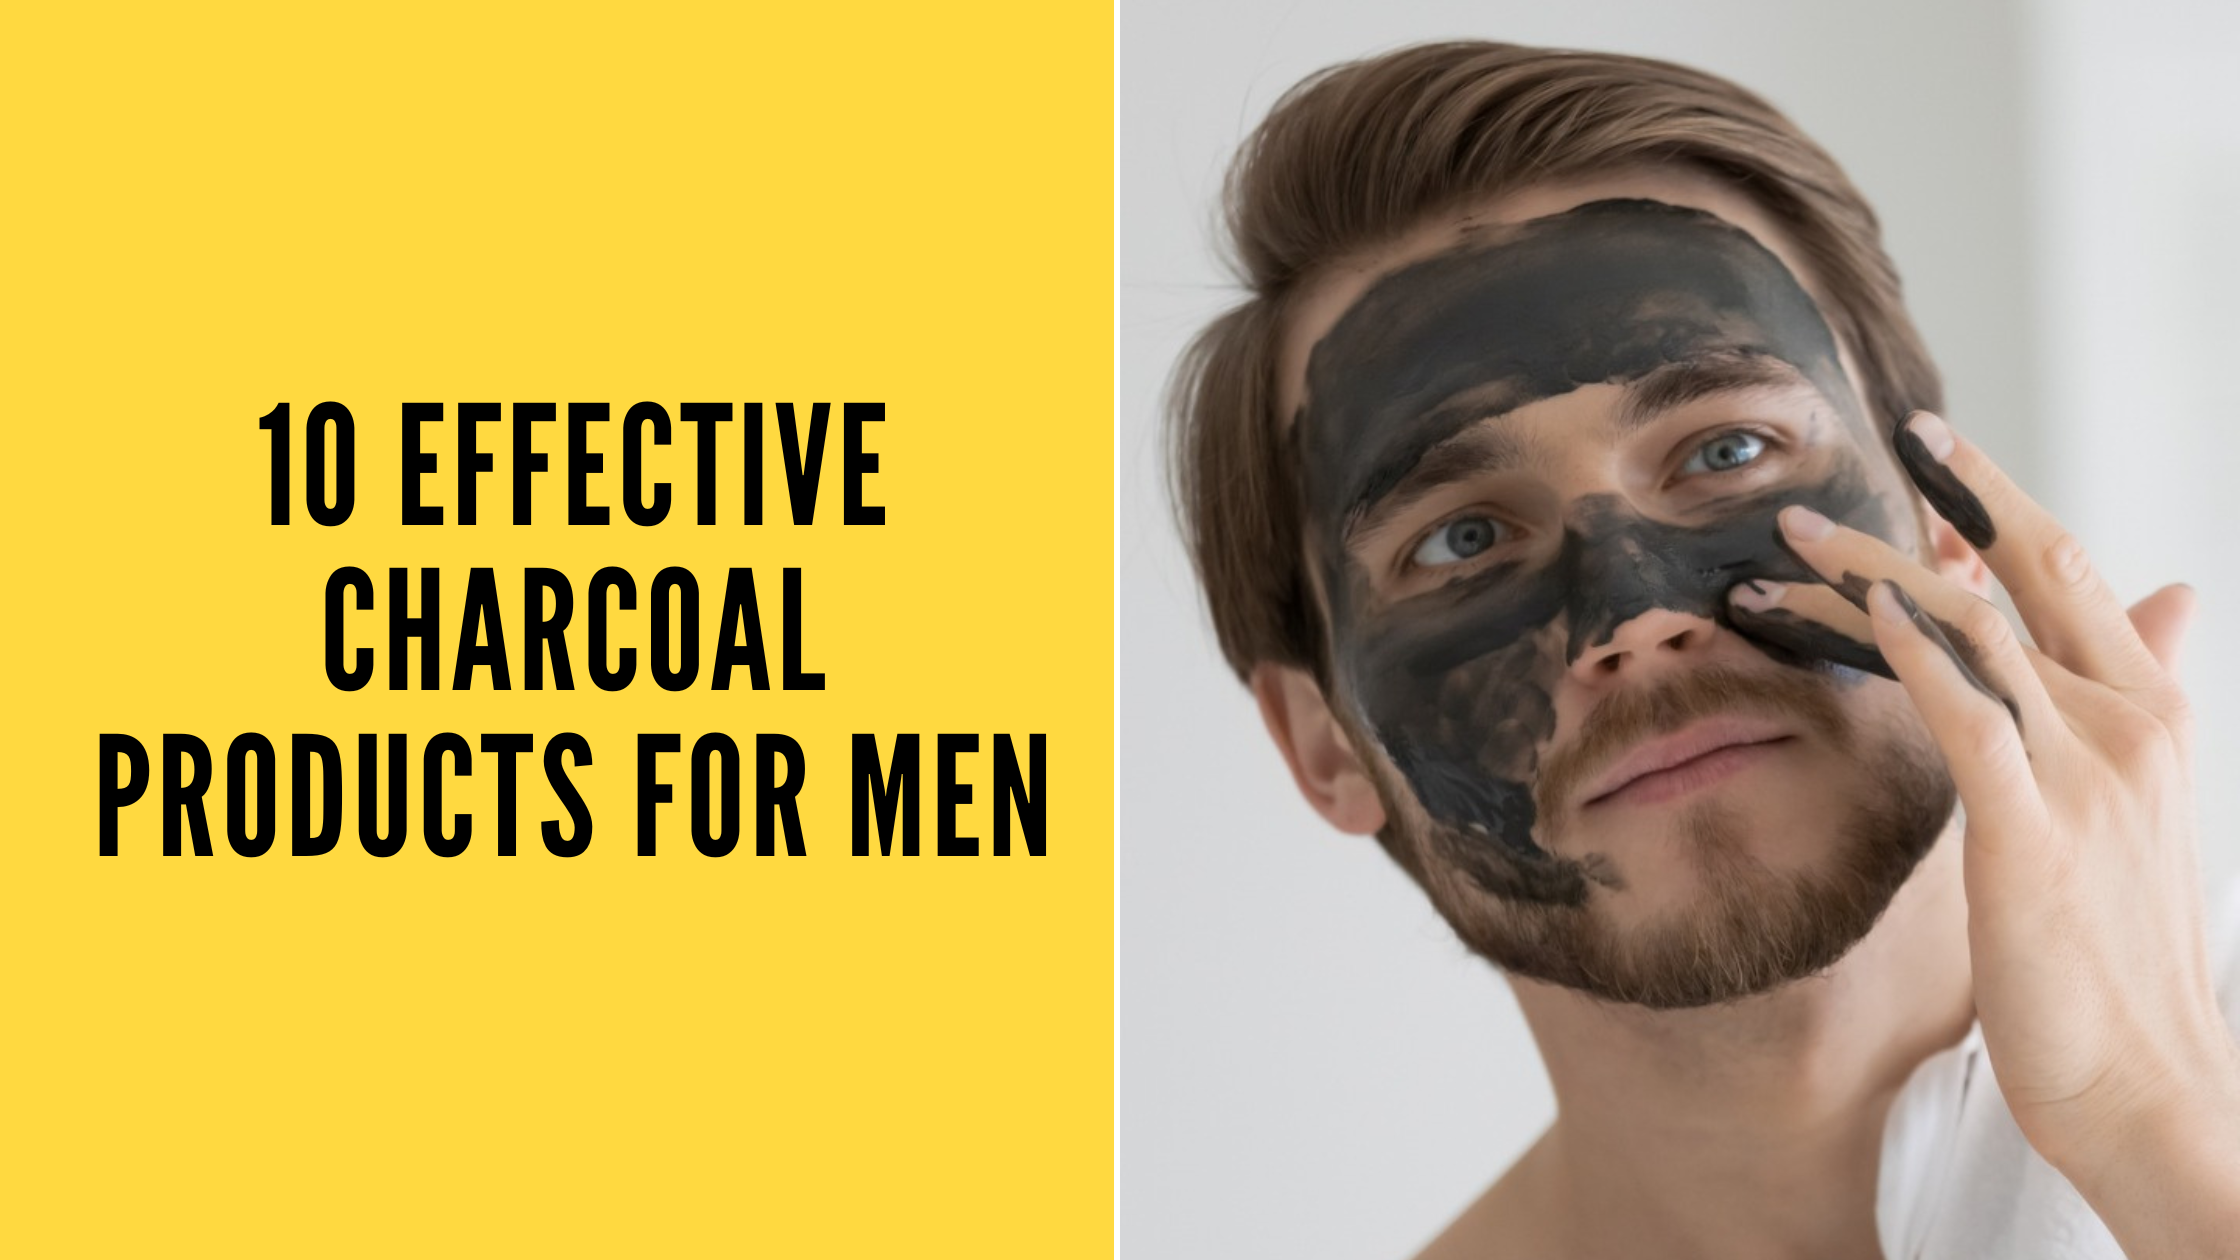 10 Effective Charcoal Products for Men